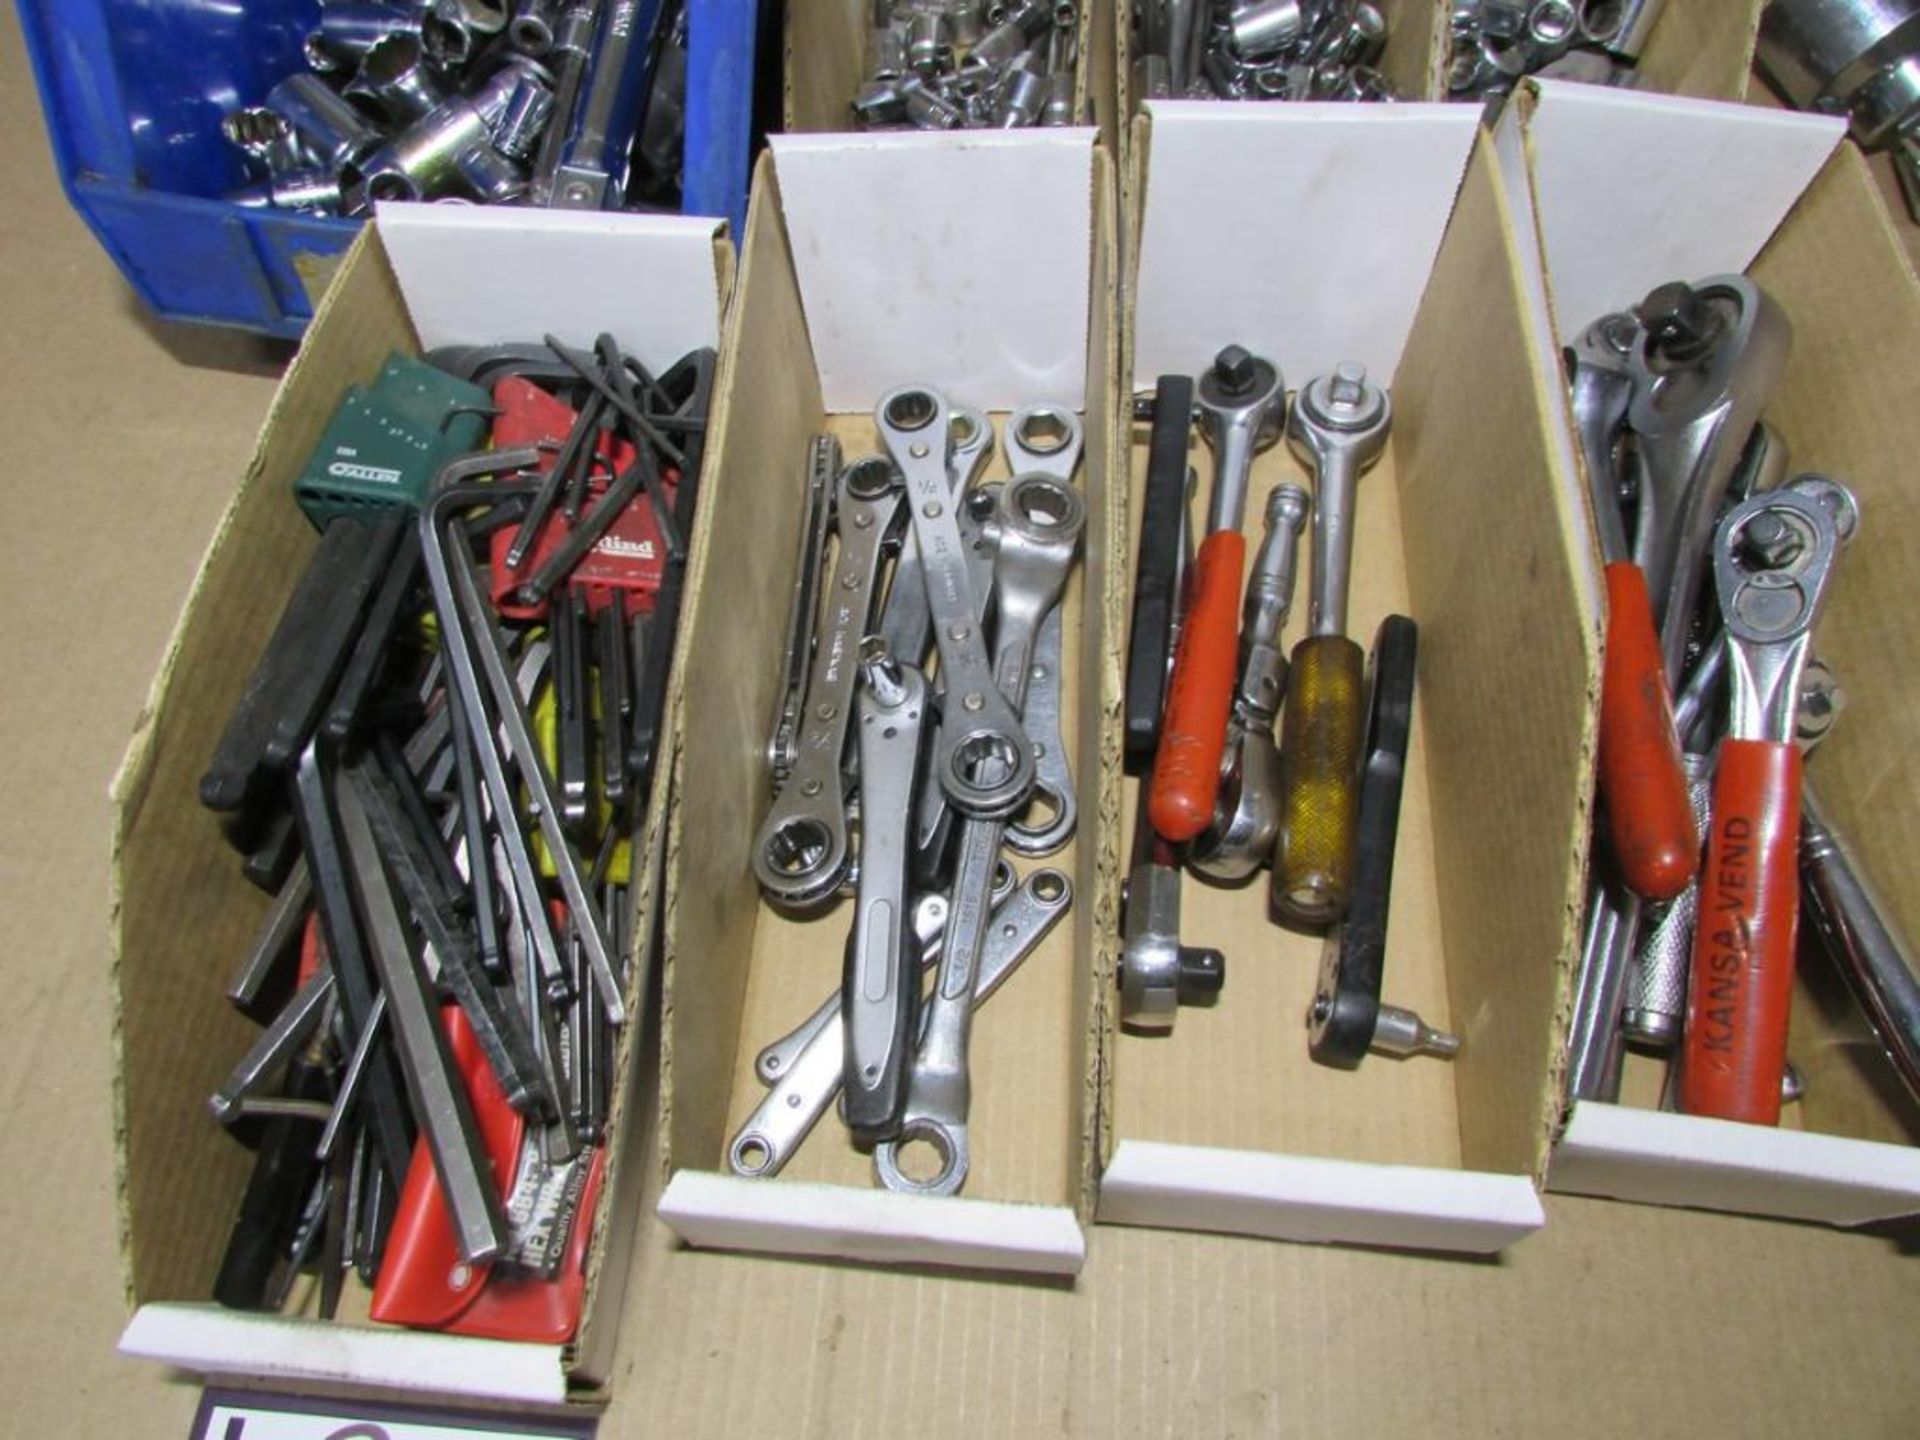 Assorted Allen Wrenches, Drivers, Pliers, Hammers, and Wrenches - Image 3 of 4